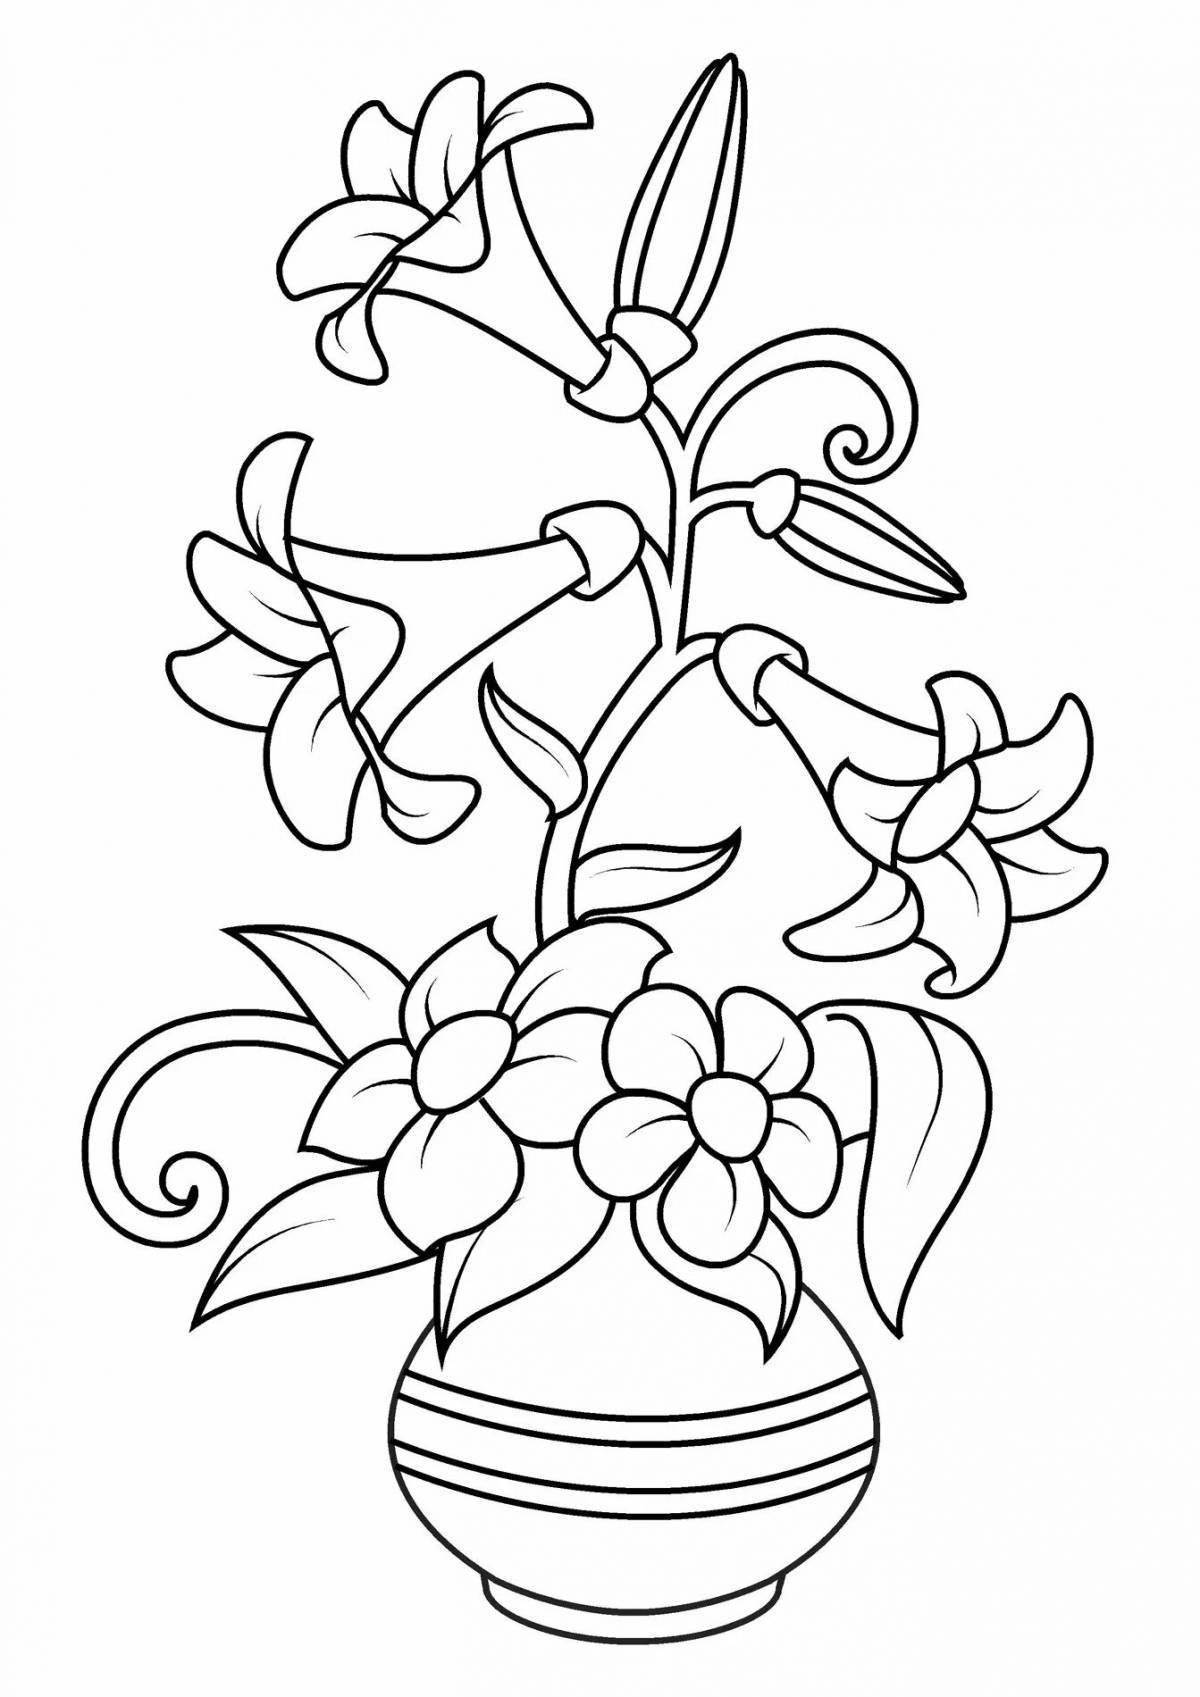 Merry vase of flowers coloring book for children